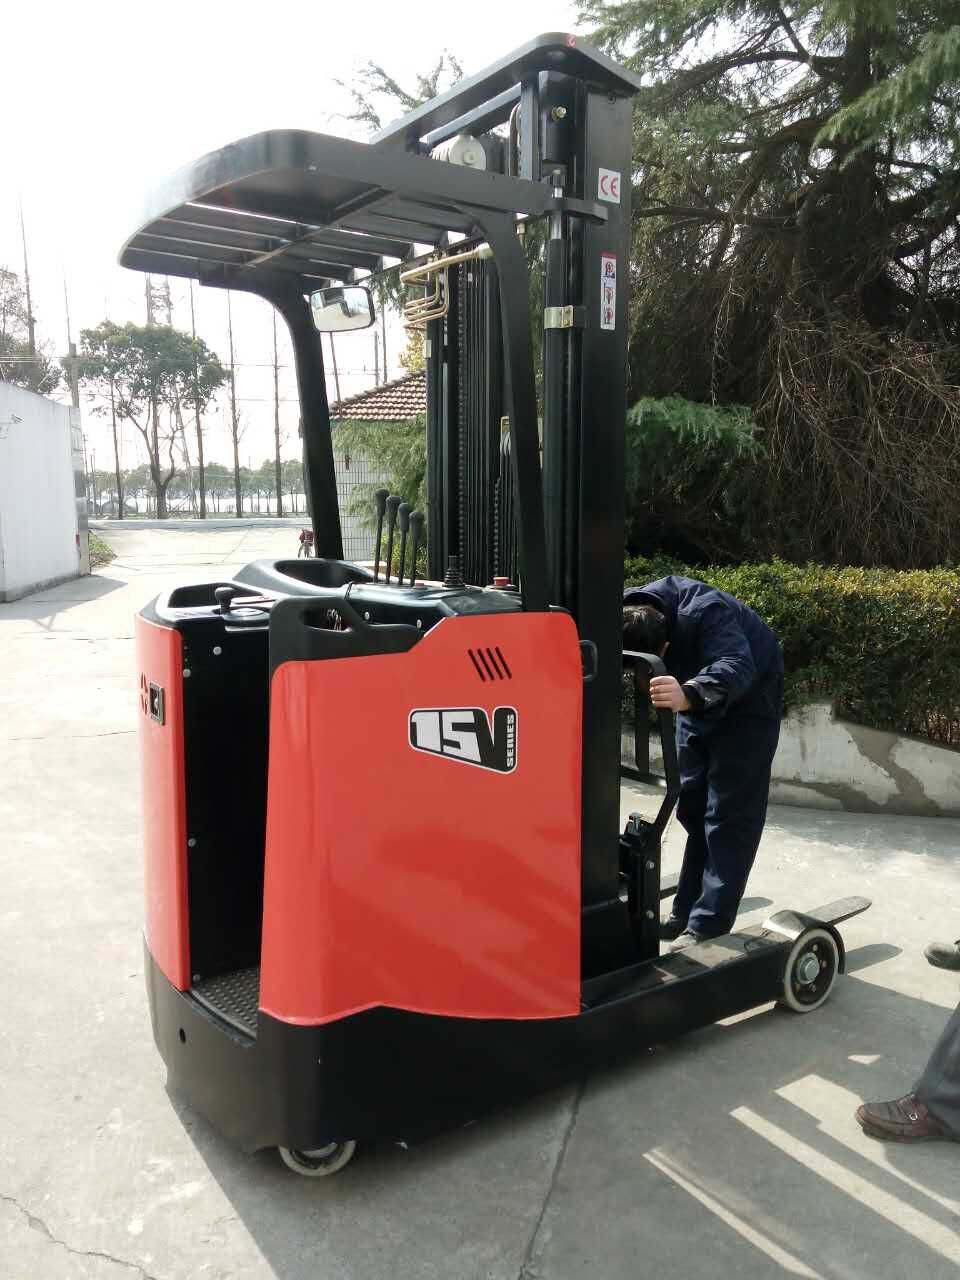 1.5 Ton Electric Stand-up Reach Truck(CQD15S-E)